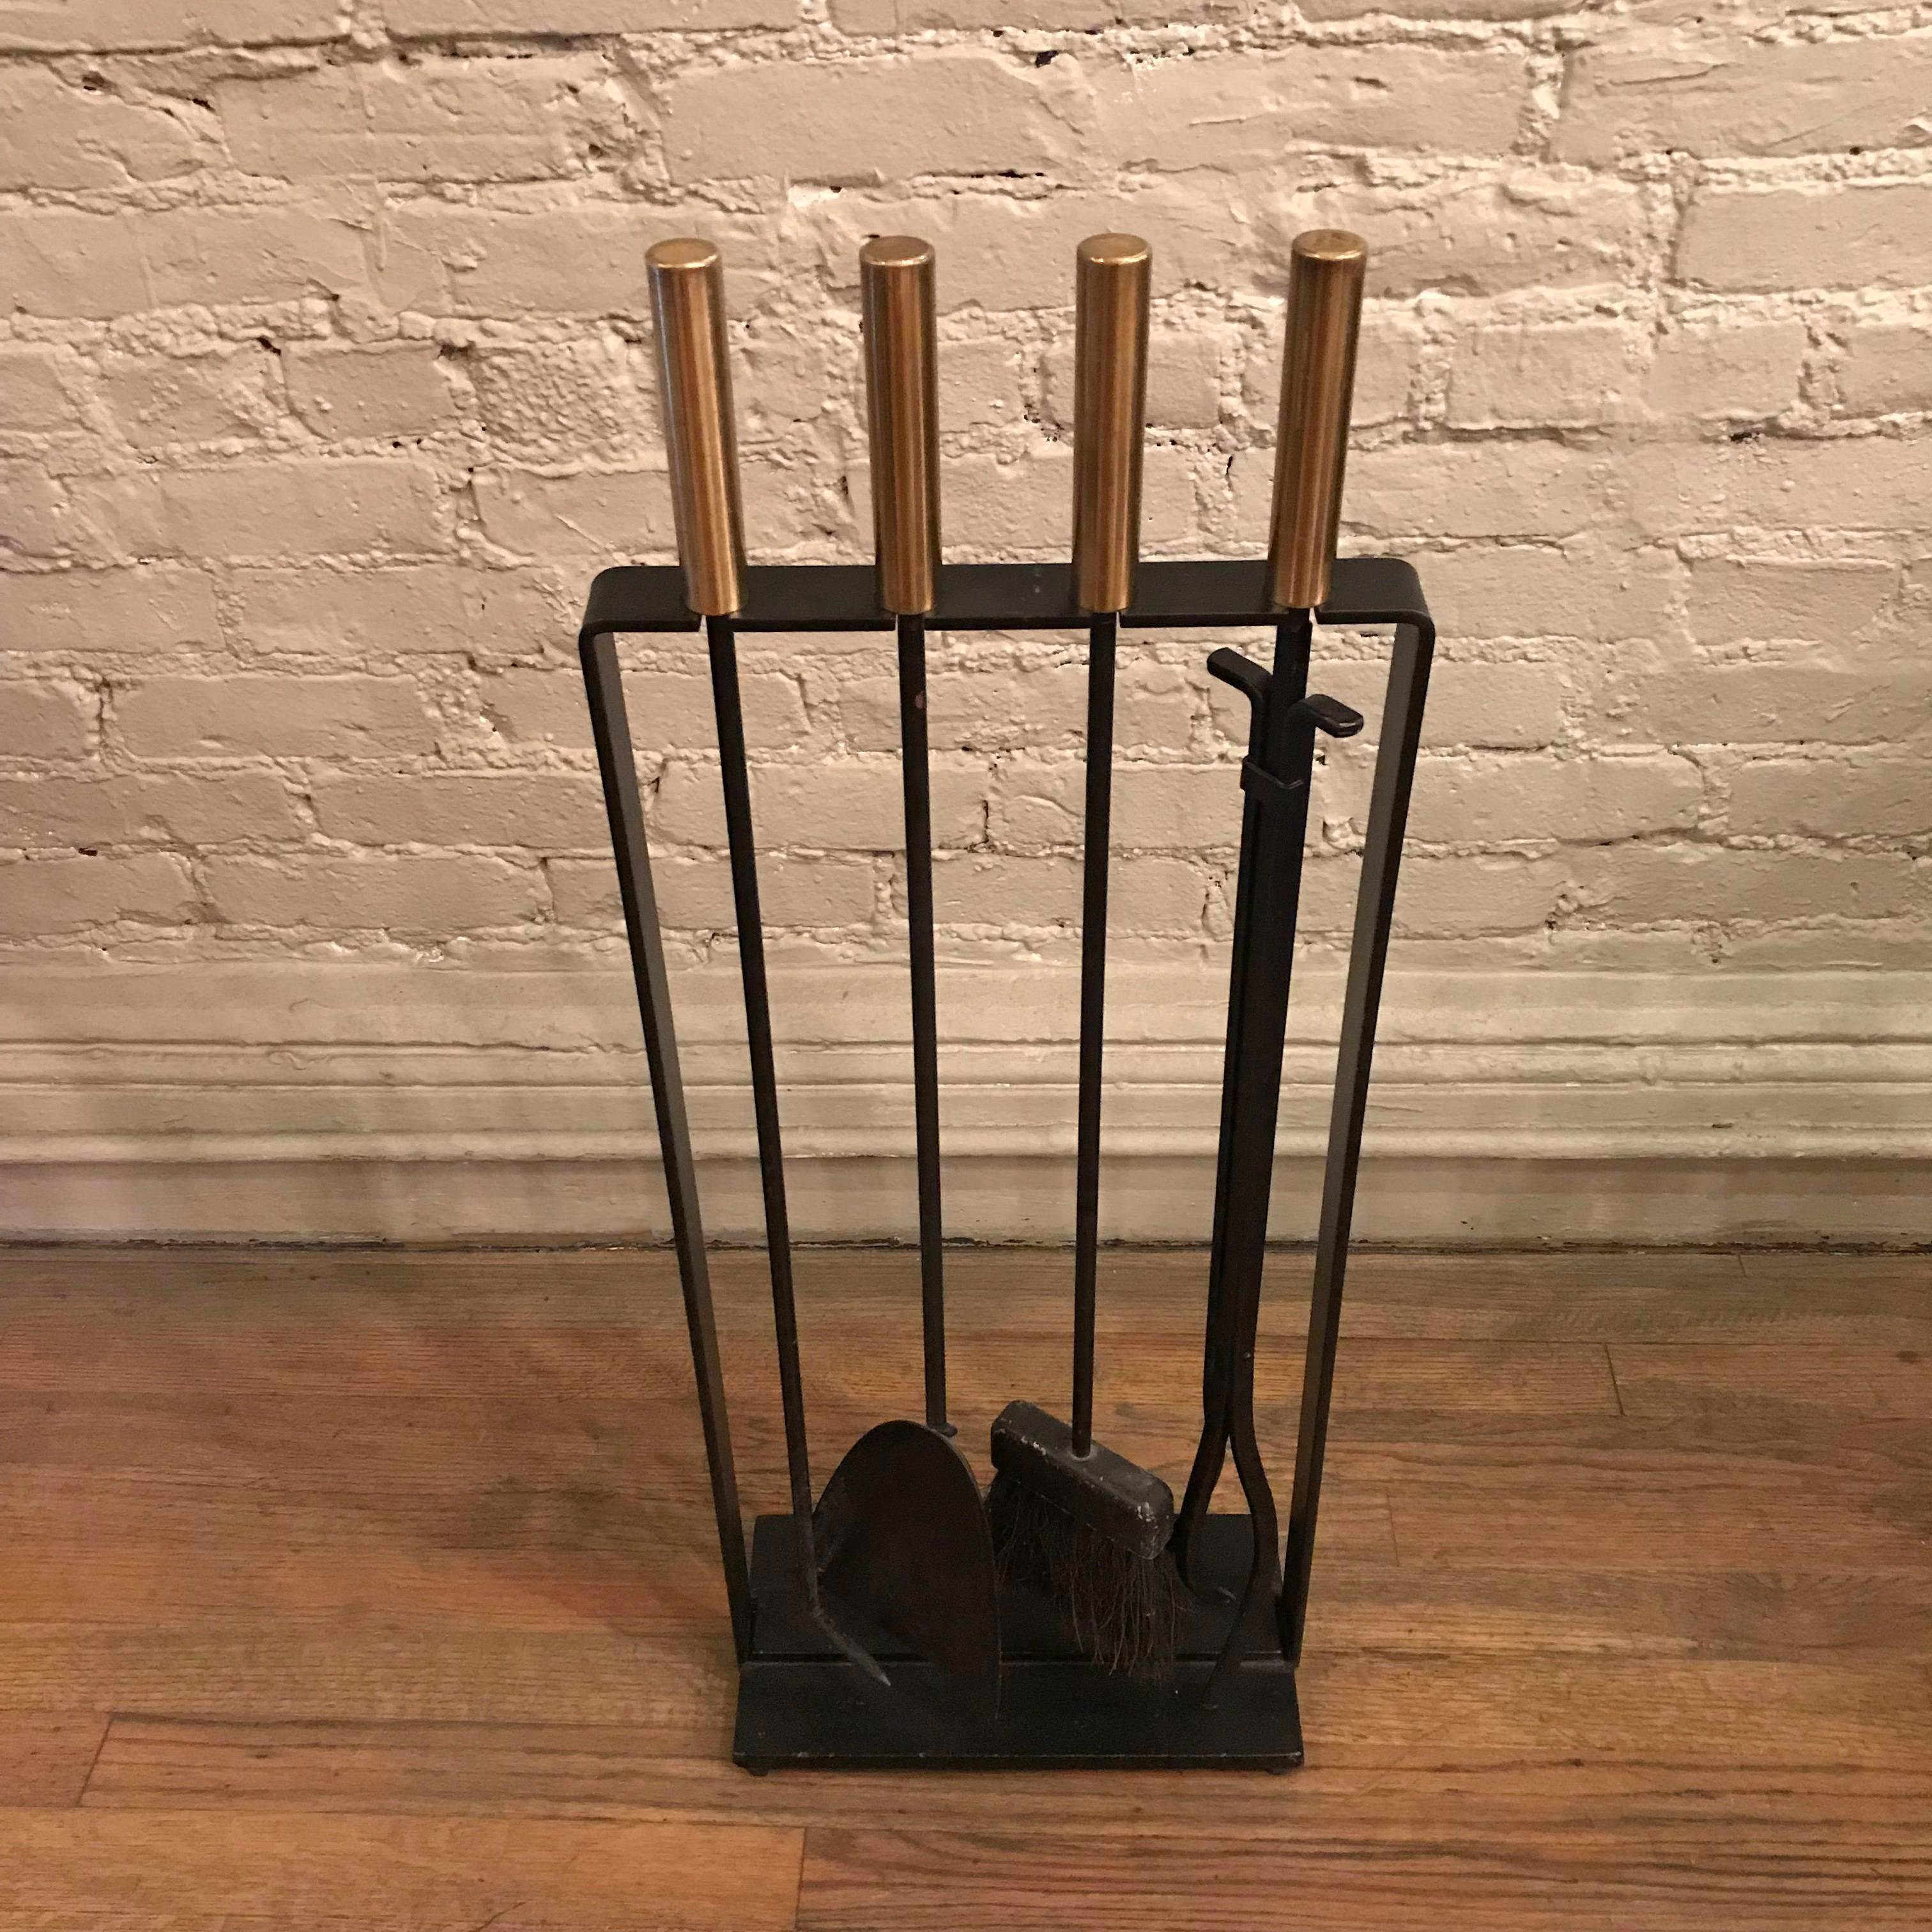 Modernist, four-piece, fireplace tool set by Pilgrim is black wrought iron with polished brass handles.